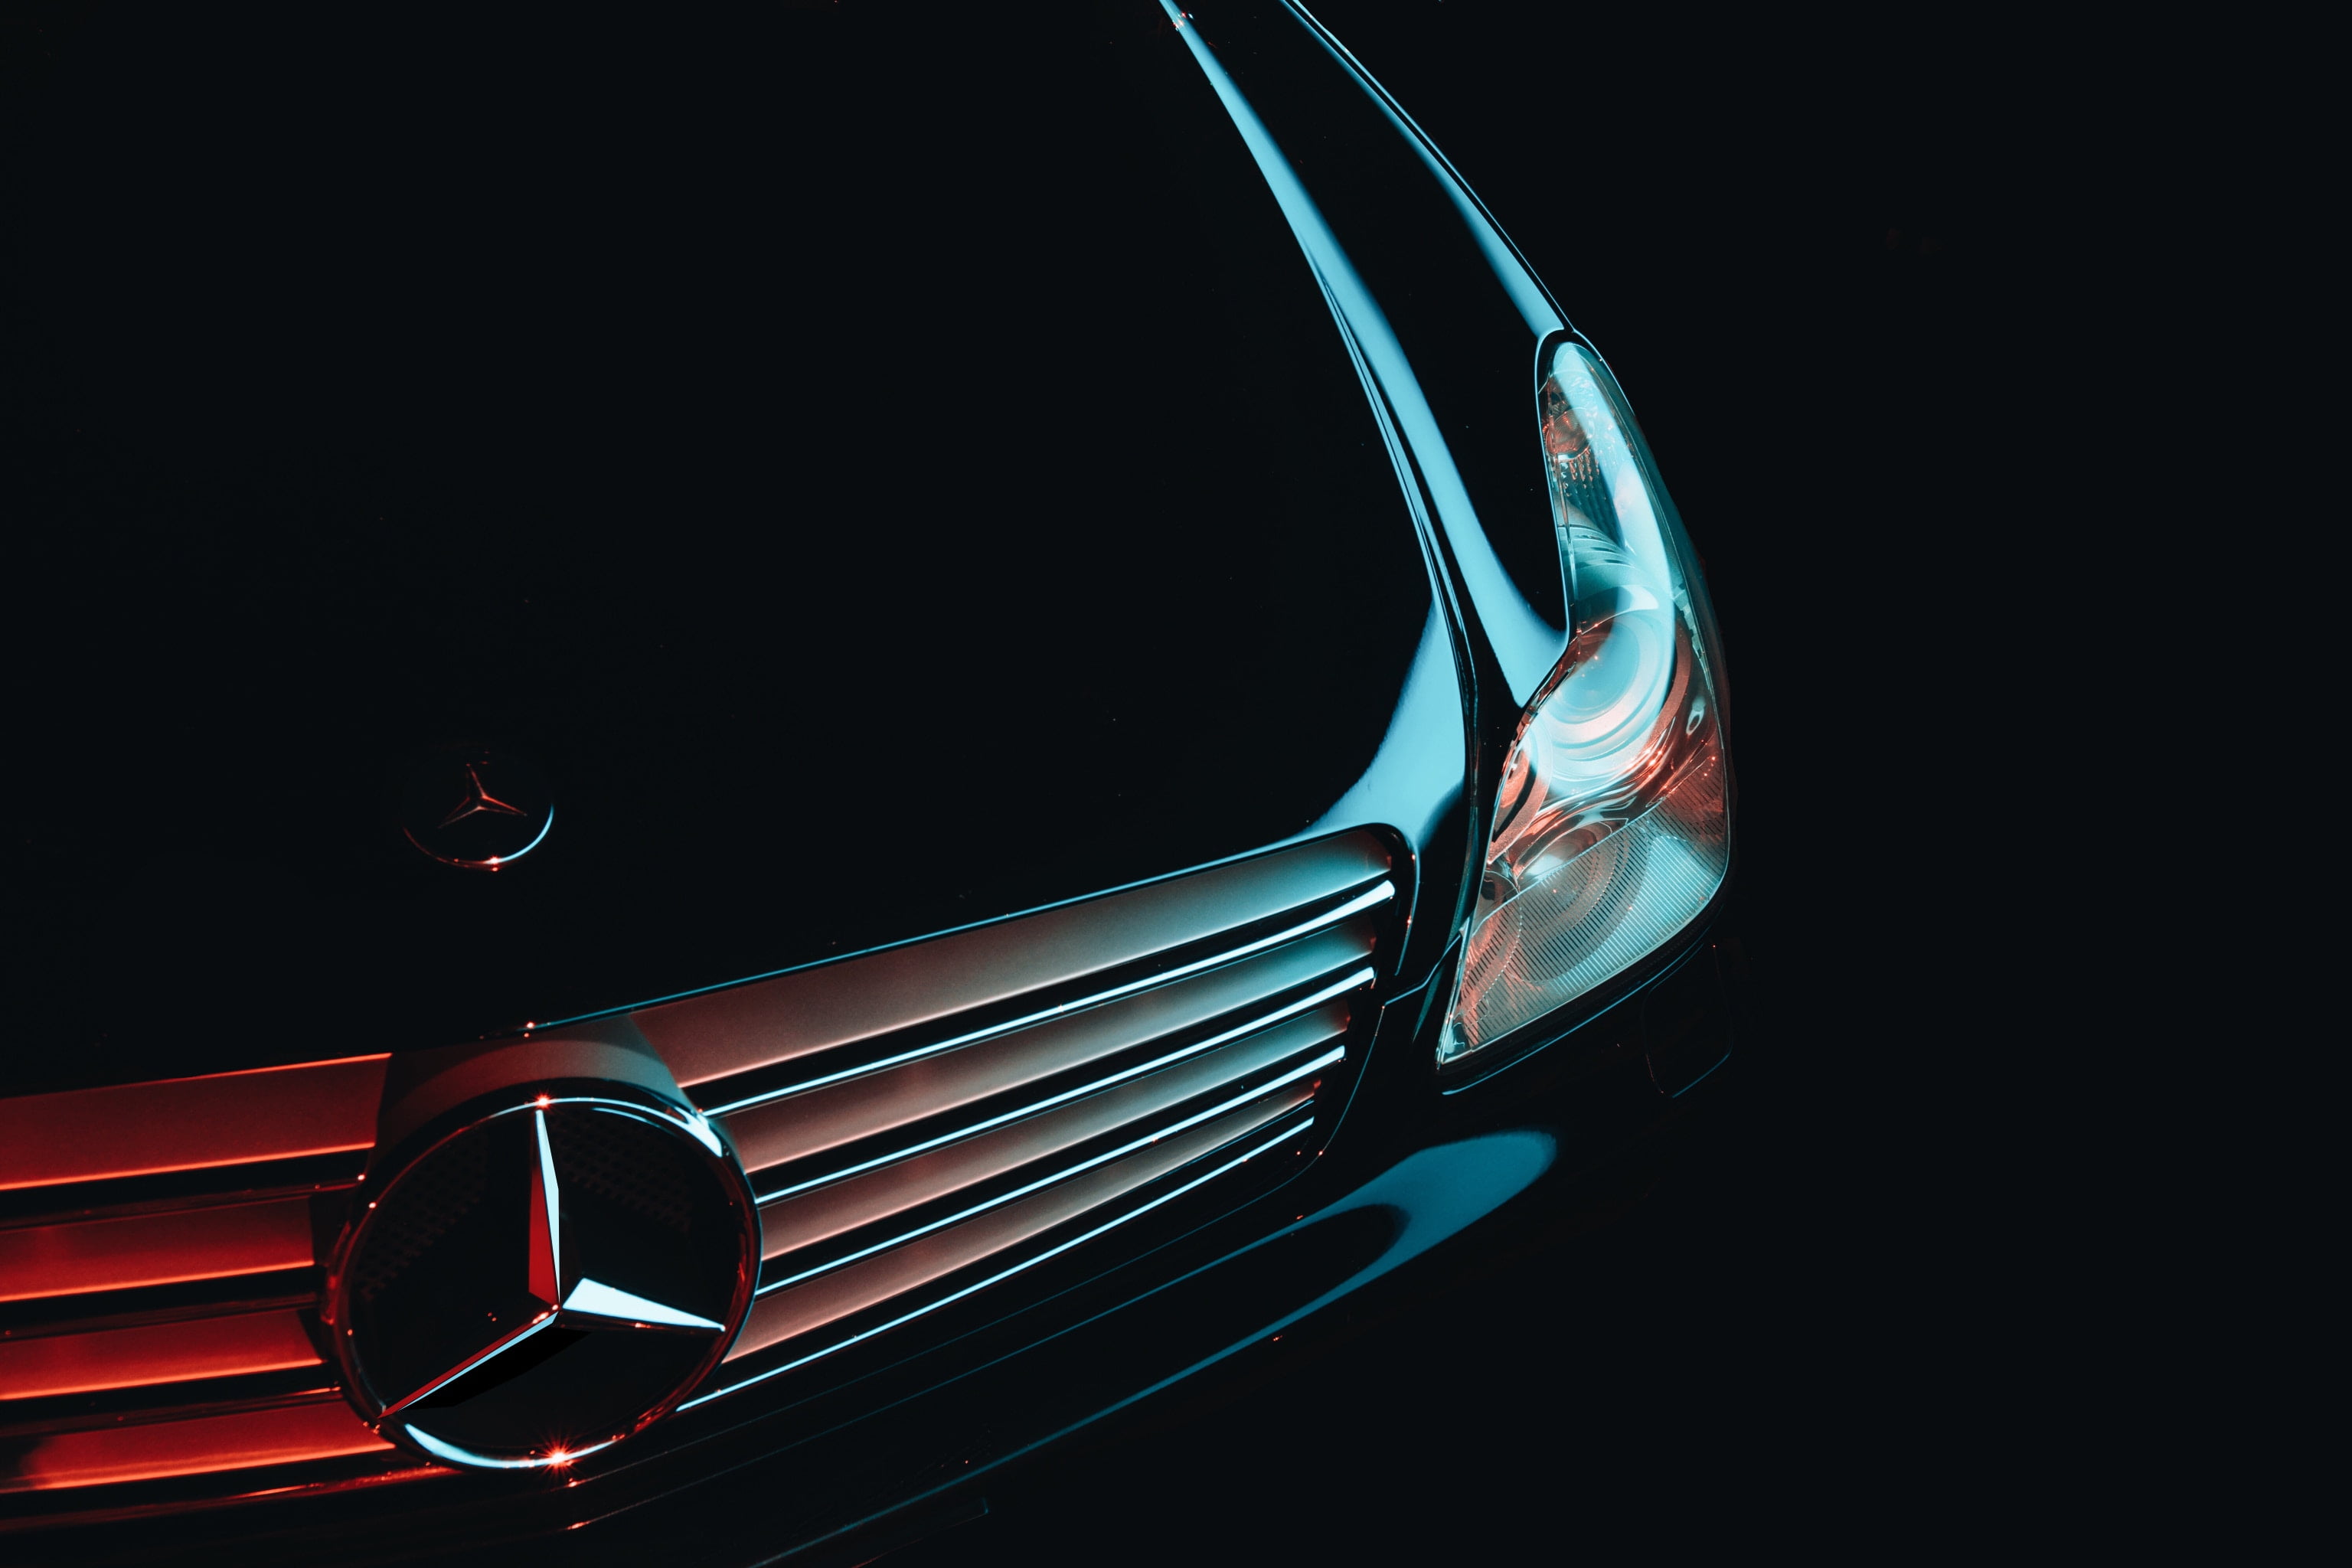 mercedes, front bumper, headlight, no people, close-up, black background